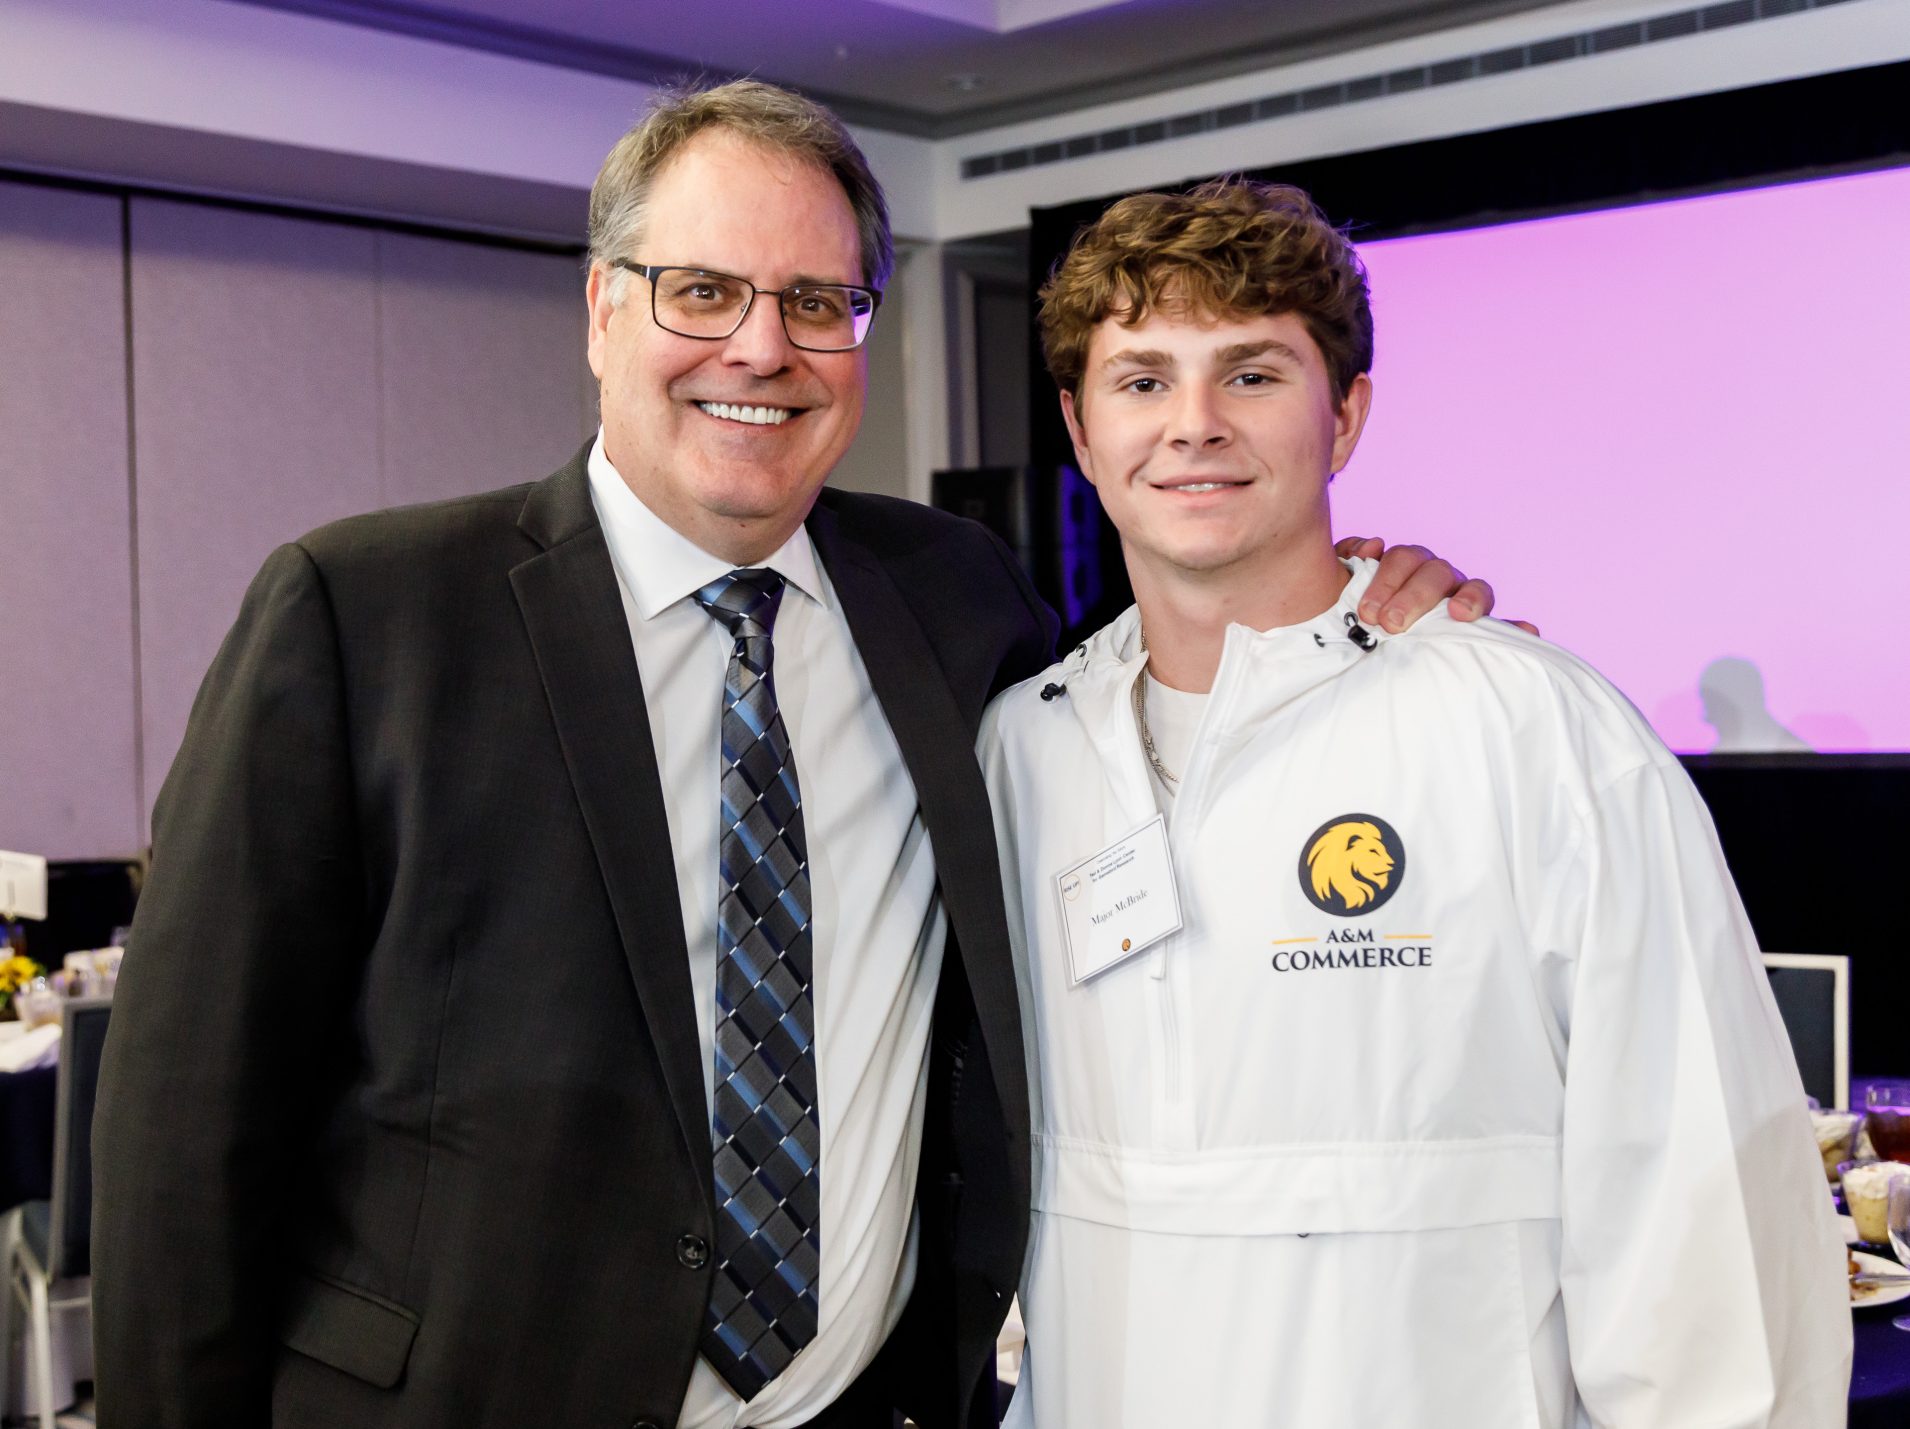 Dr. Mark Rudin (left) and student Major McBride (right) face the camera and smile. The man on the left has his hand on the shoulder of the man on the right.